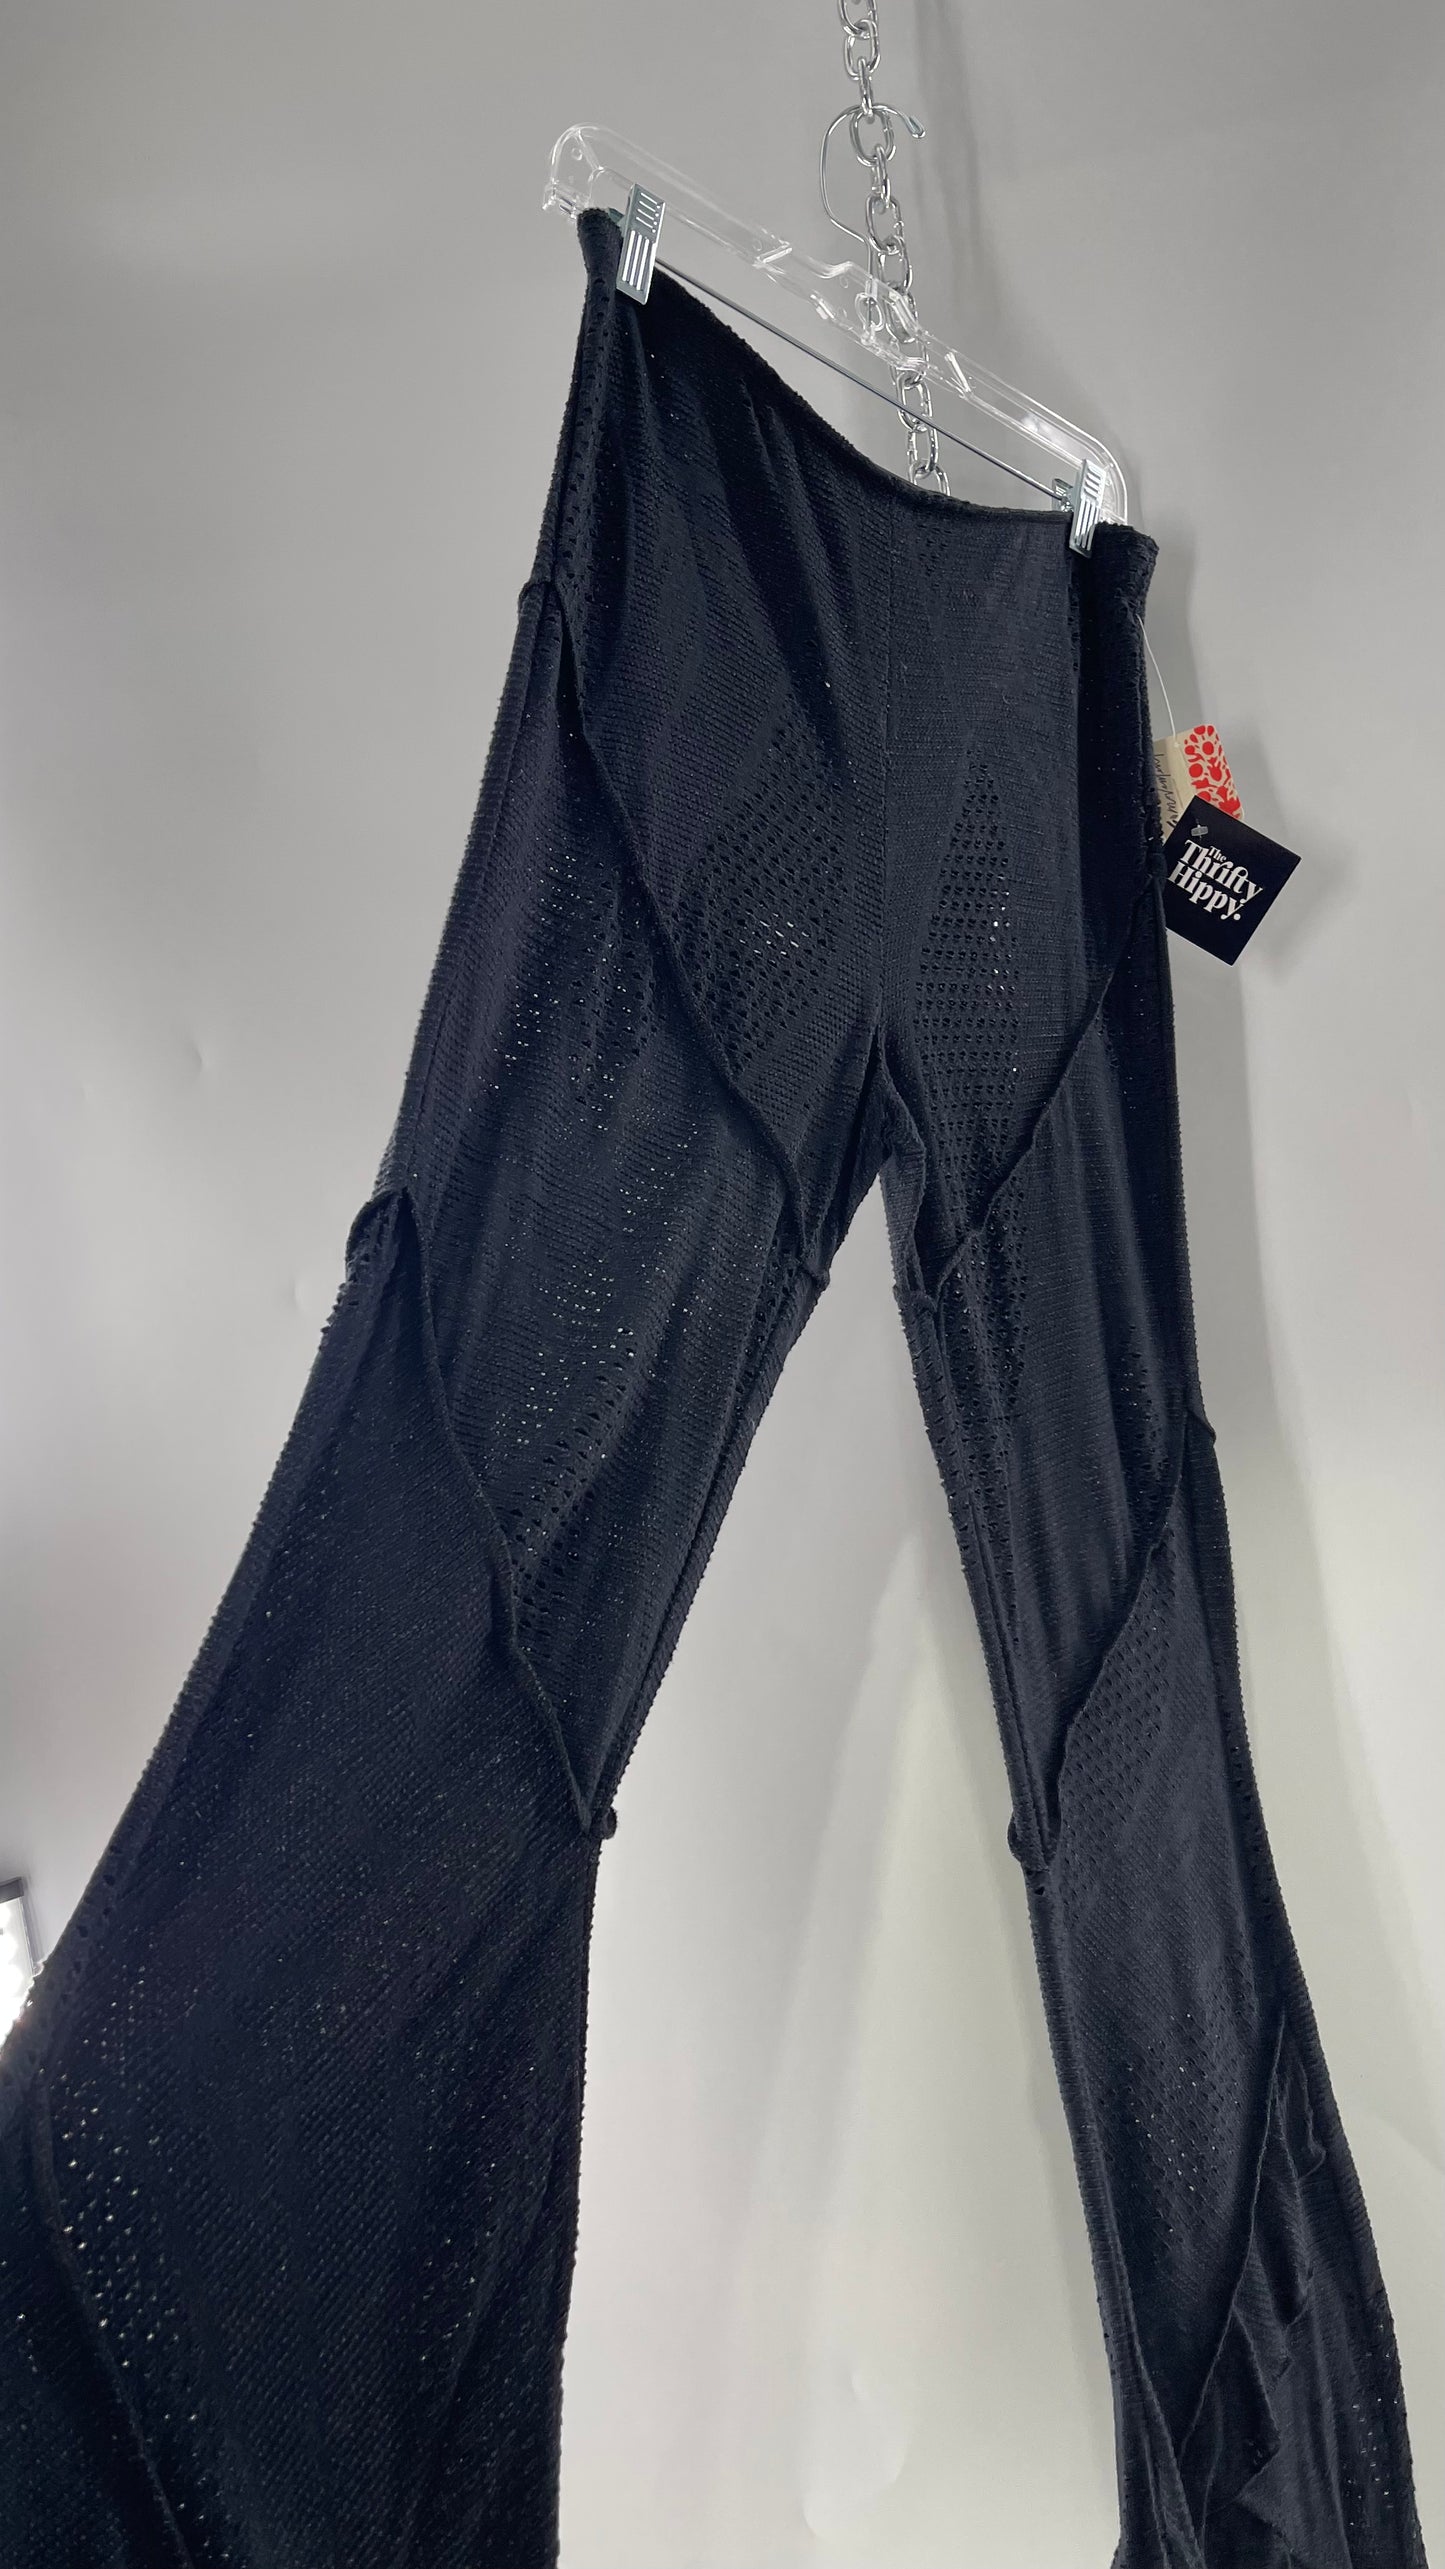 Free People  Black Midnight Grey Mixed Pattern Kickflares with High Low Hem, Exposed Seams and Distressing Tags Attached (Medium)